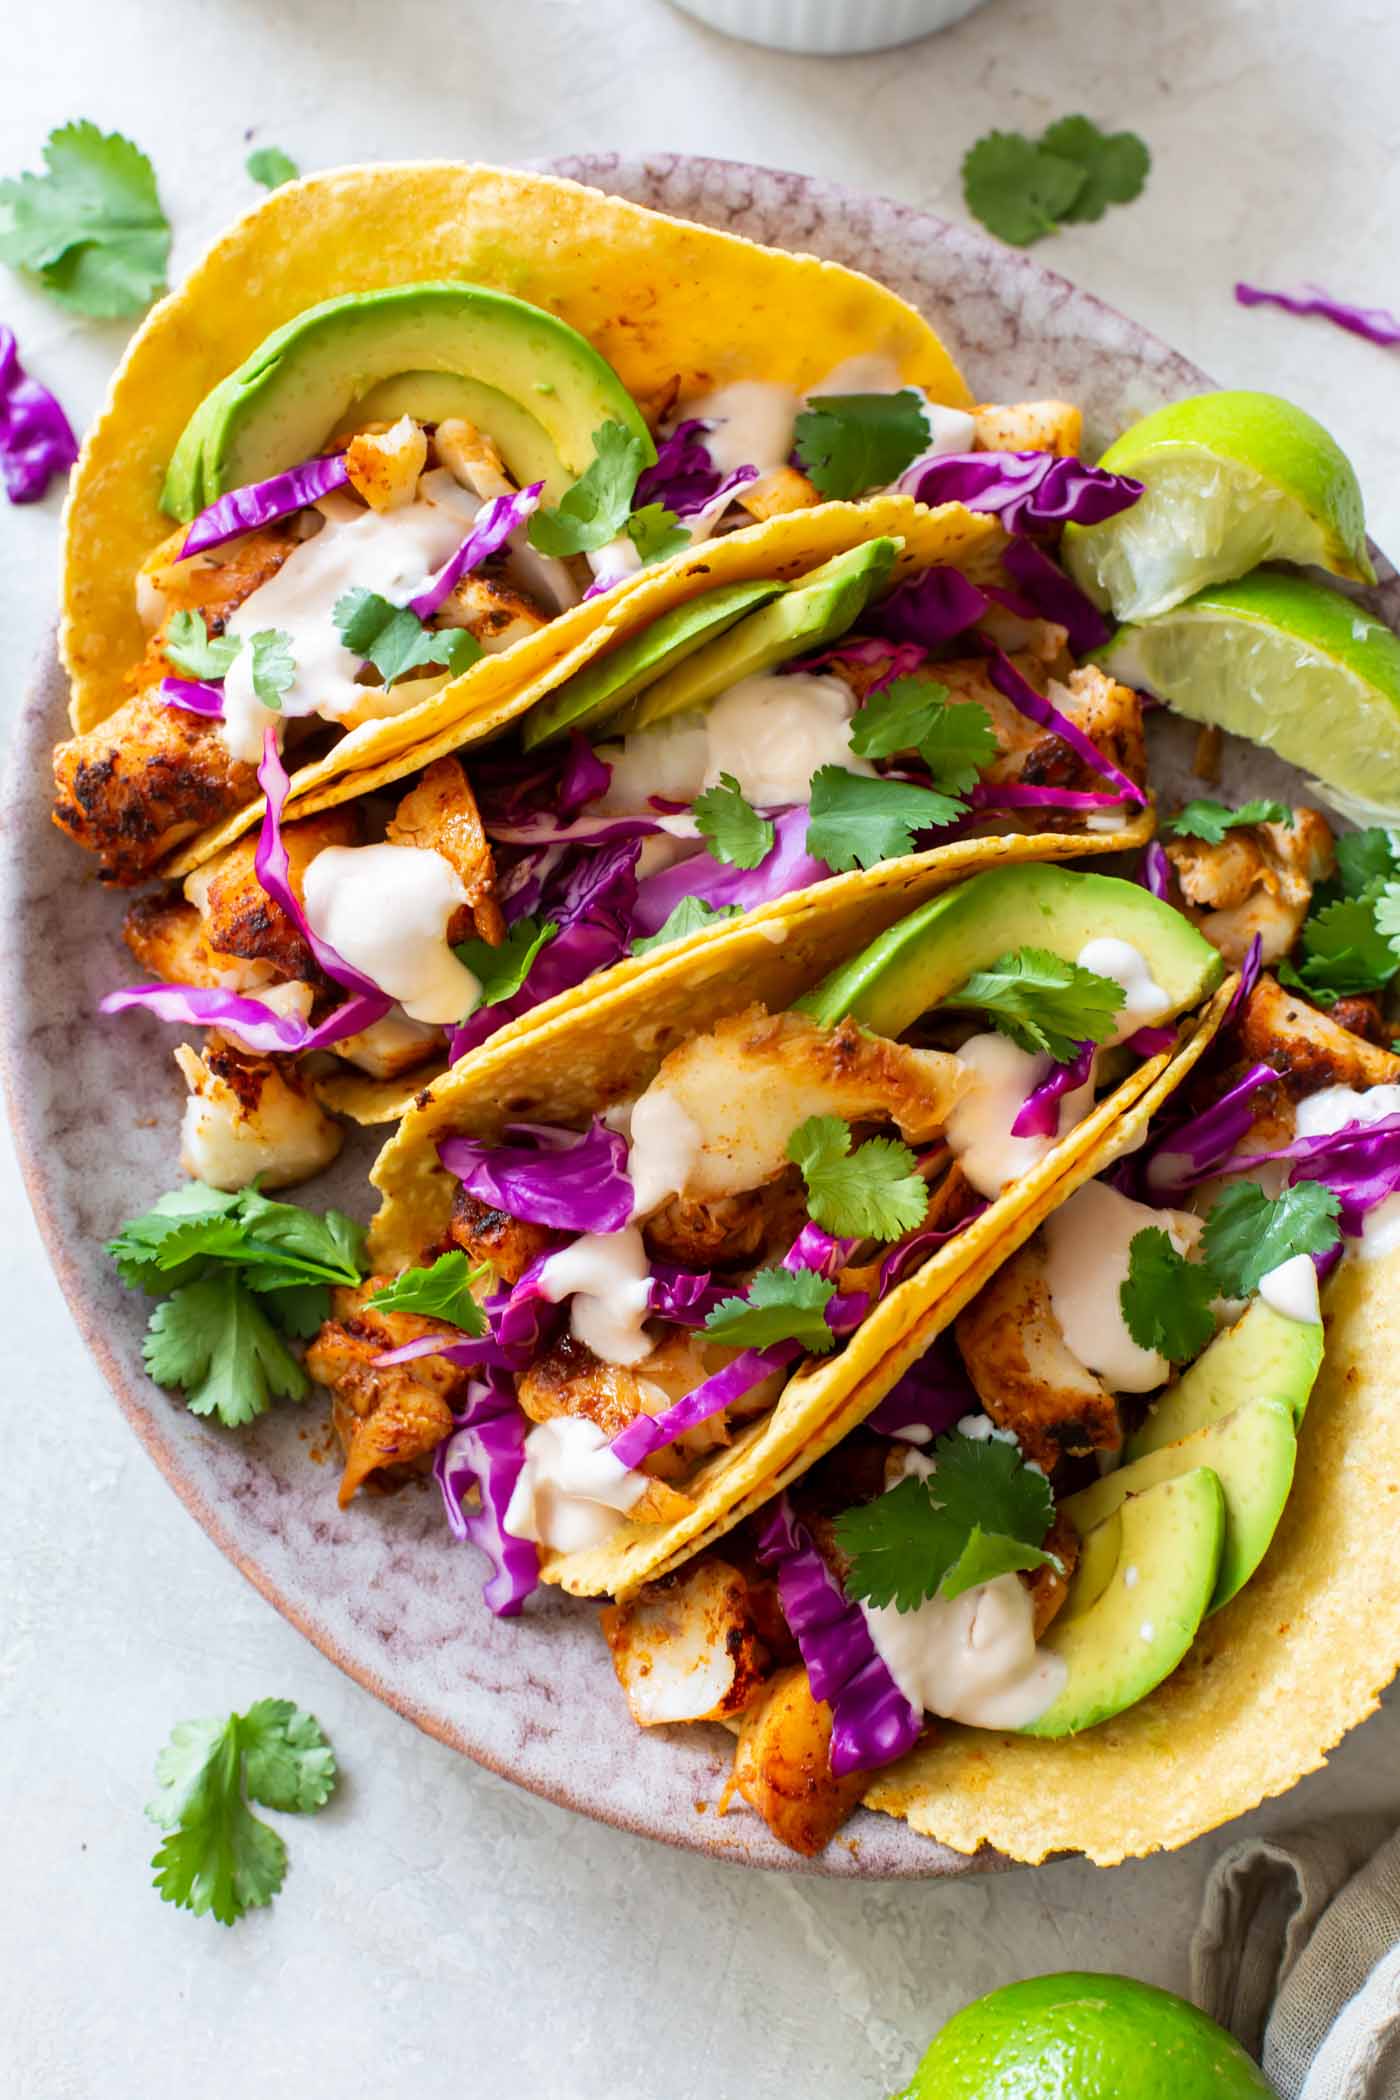 Four fish tacos with red cabbage, avocado, cilantro and fish taco sauce on a plate.